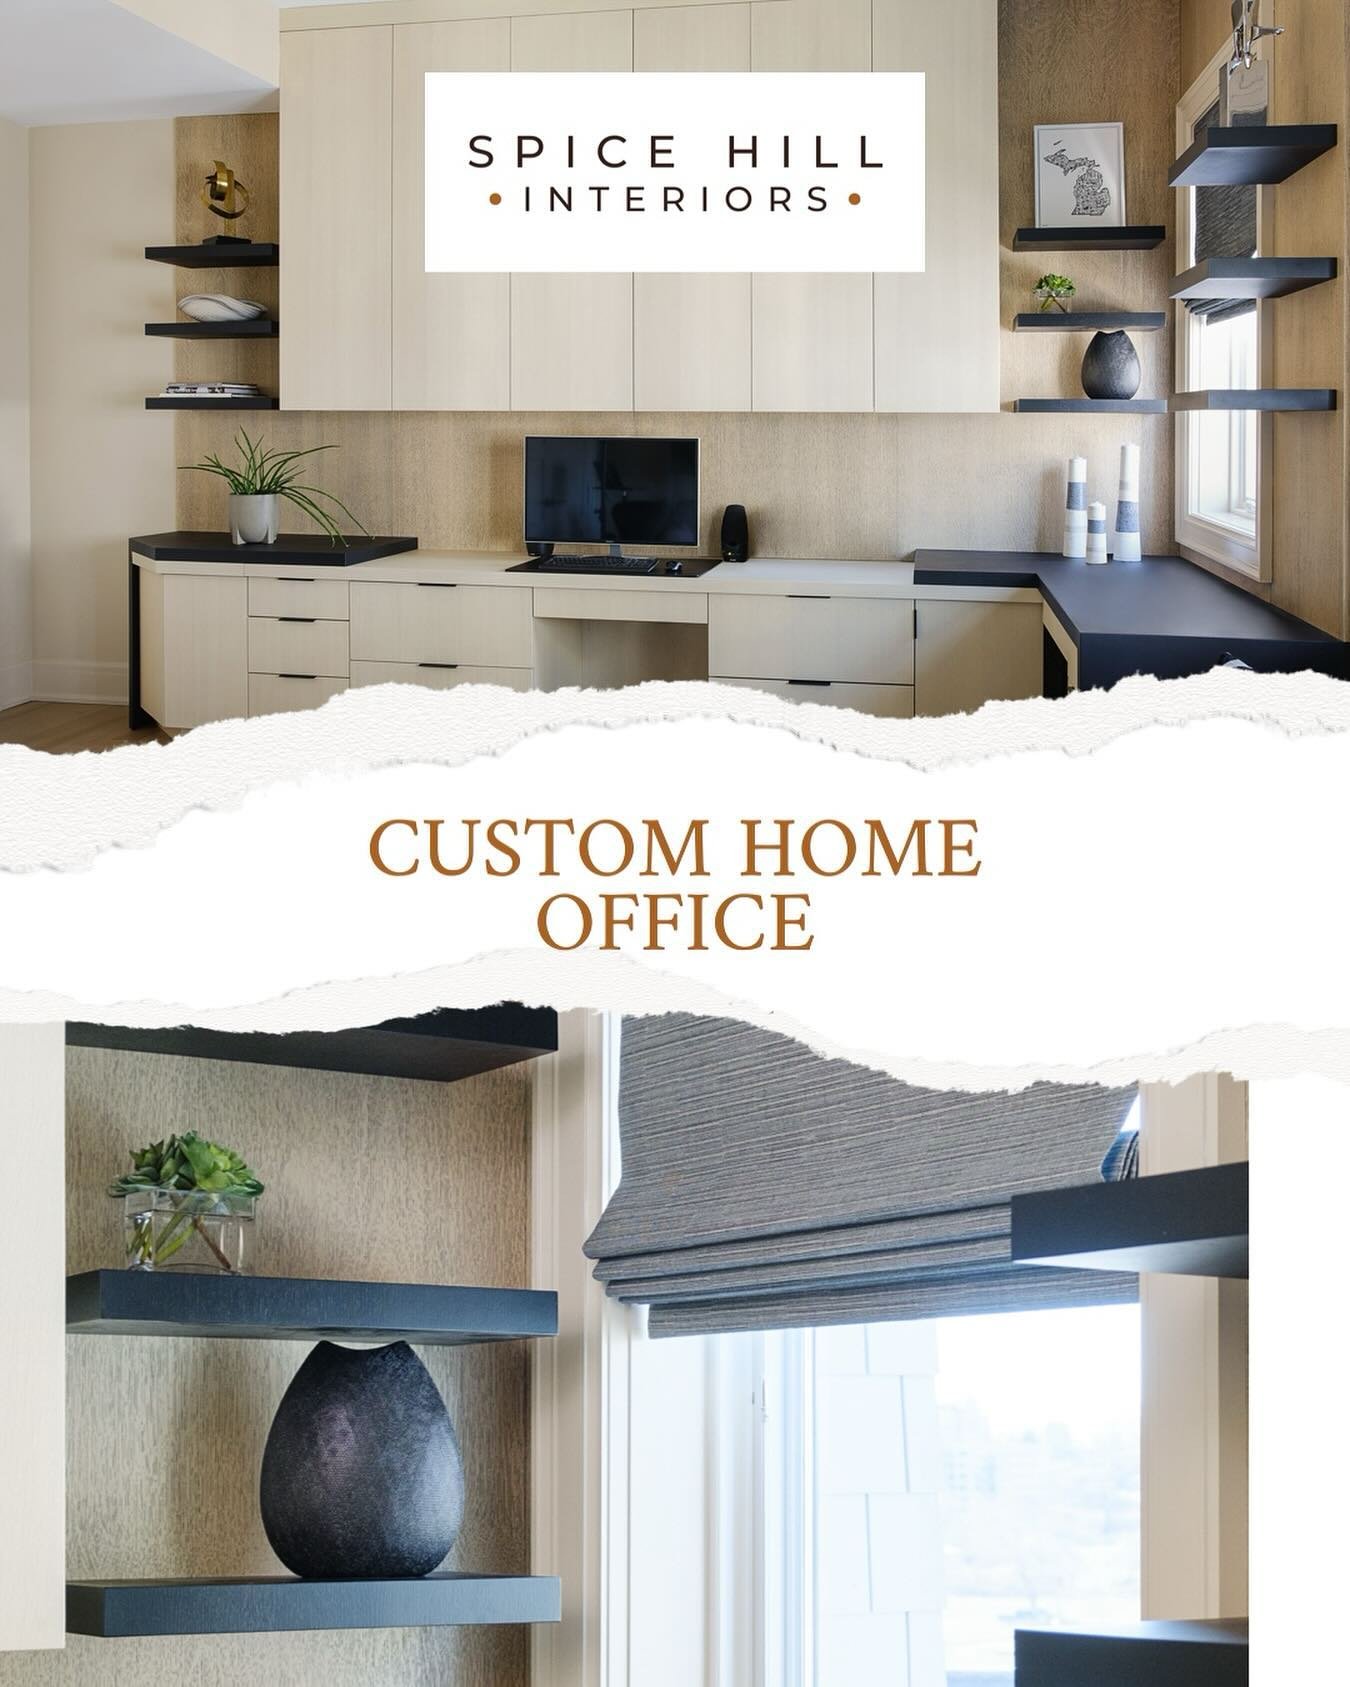 Why not work from home in total comfort?
#customcabinets #interiororganization #homeofficedreams #builtinfurniture spicehillinteriors